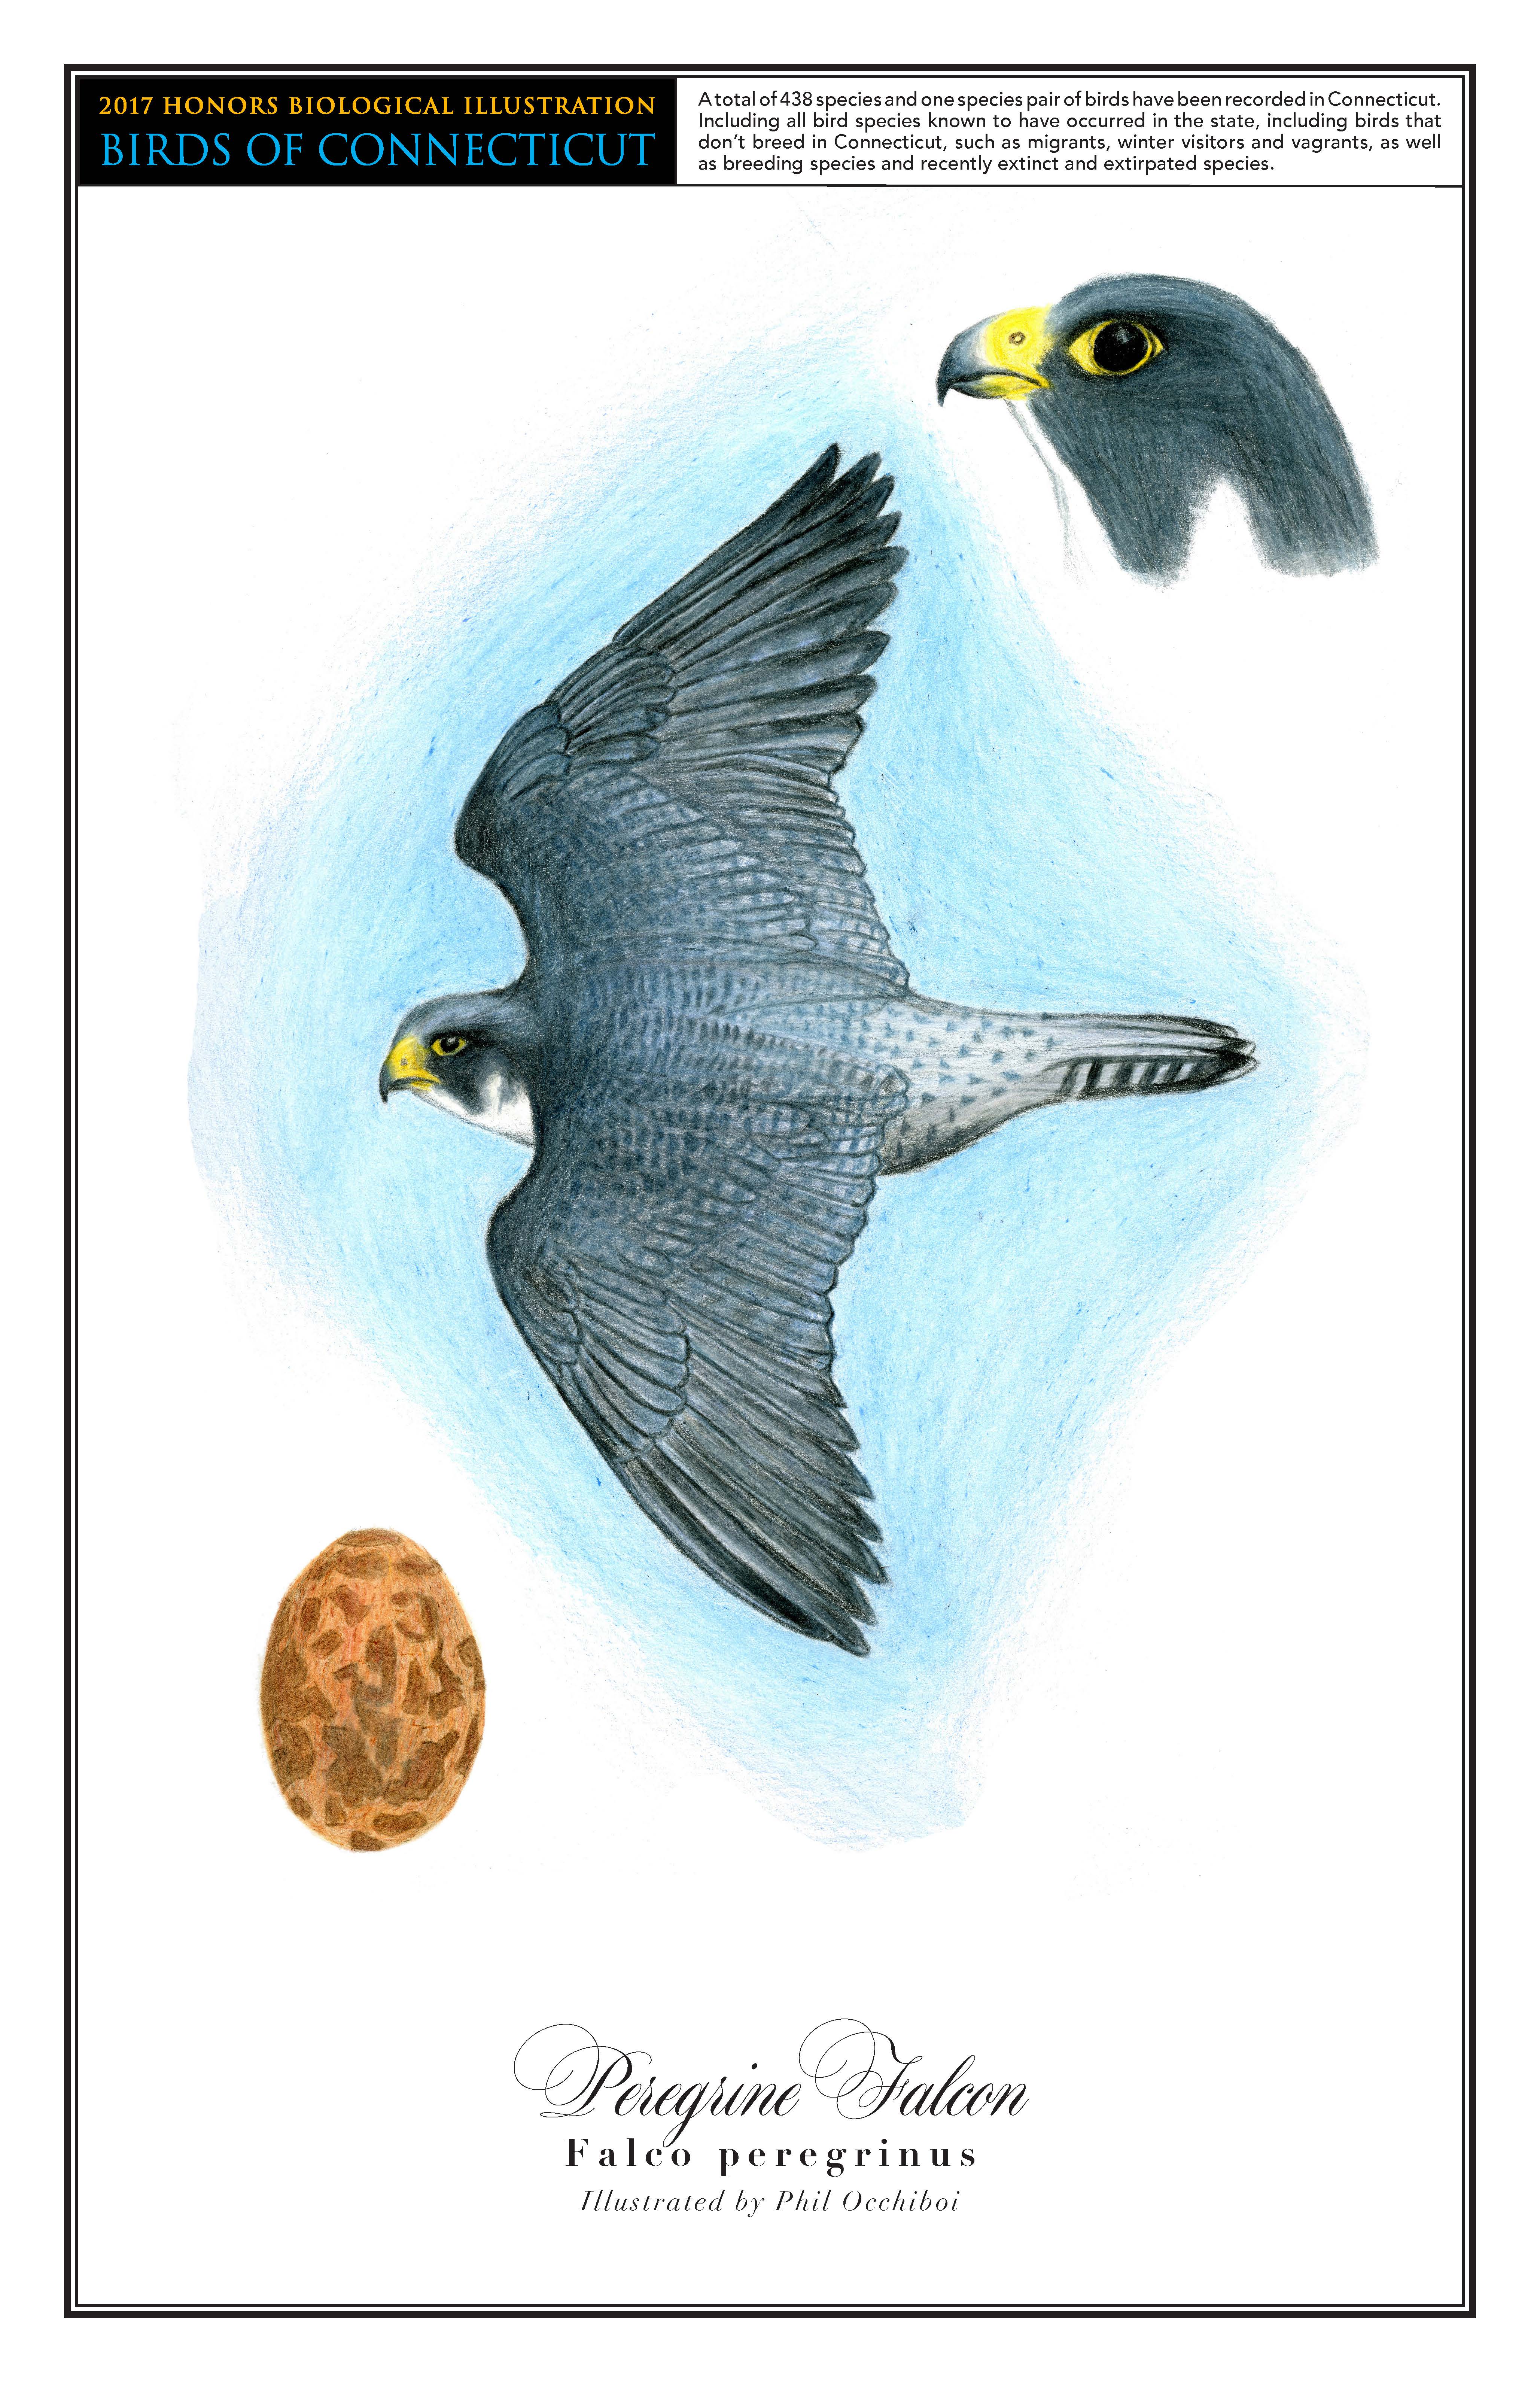 The peregrine falcon has a dark grey body that gets lighter towards its tail feathers. In the center of the page is a drawing of the bird flying with its wings outstretched. A close up drawing of the bird's head is in the top right corner. Its egg, which is a light orange with brown spots, is in the bottom left corner.